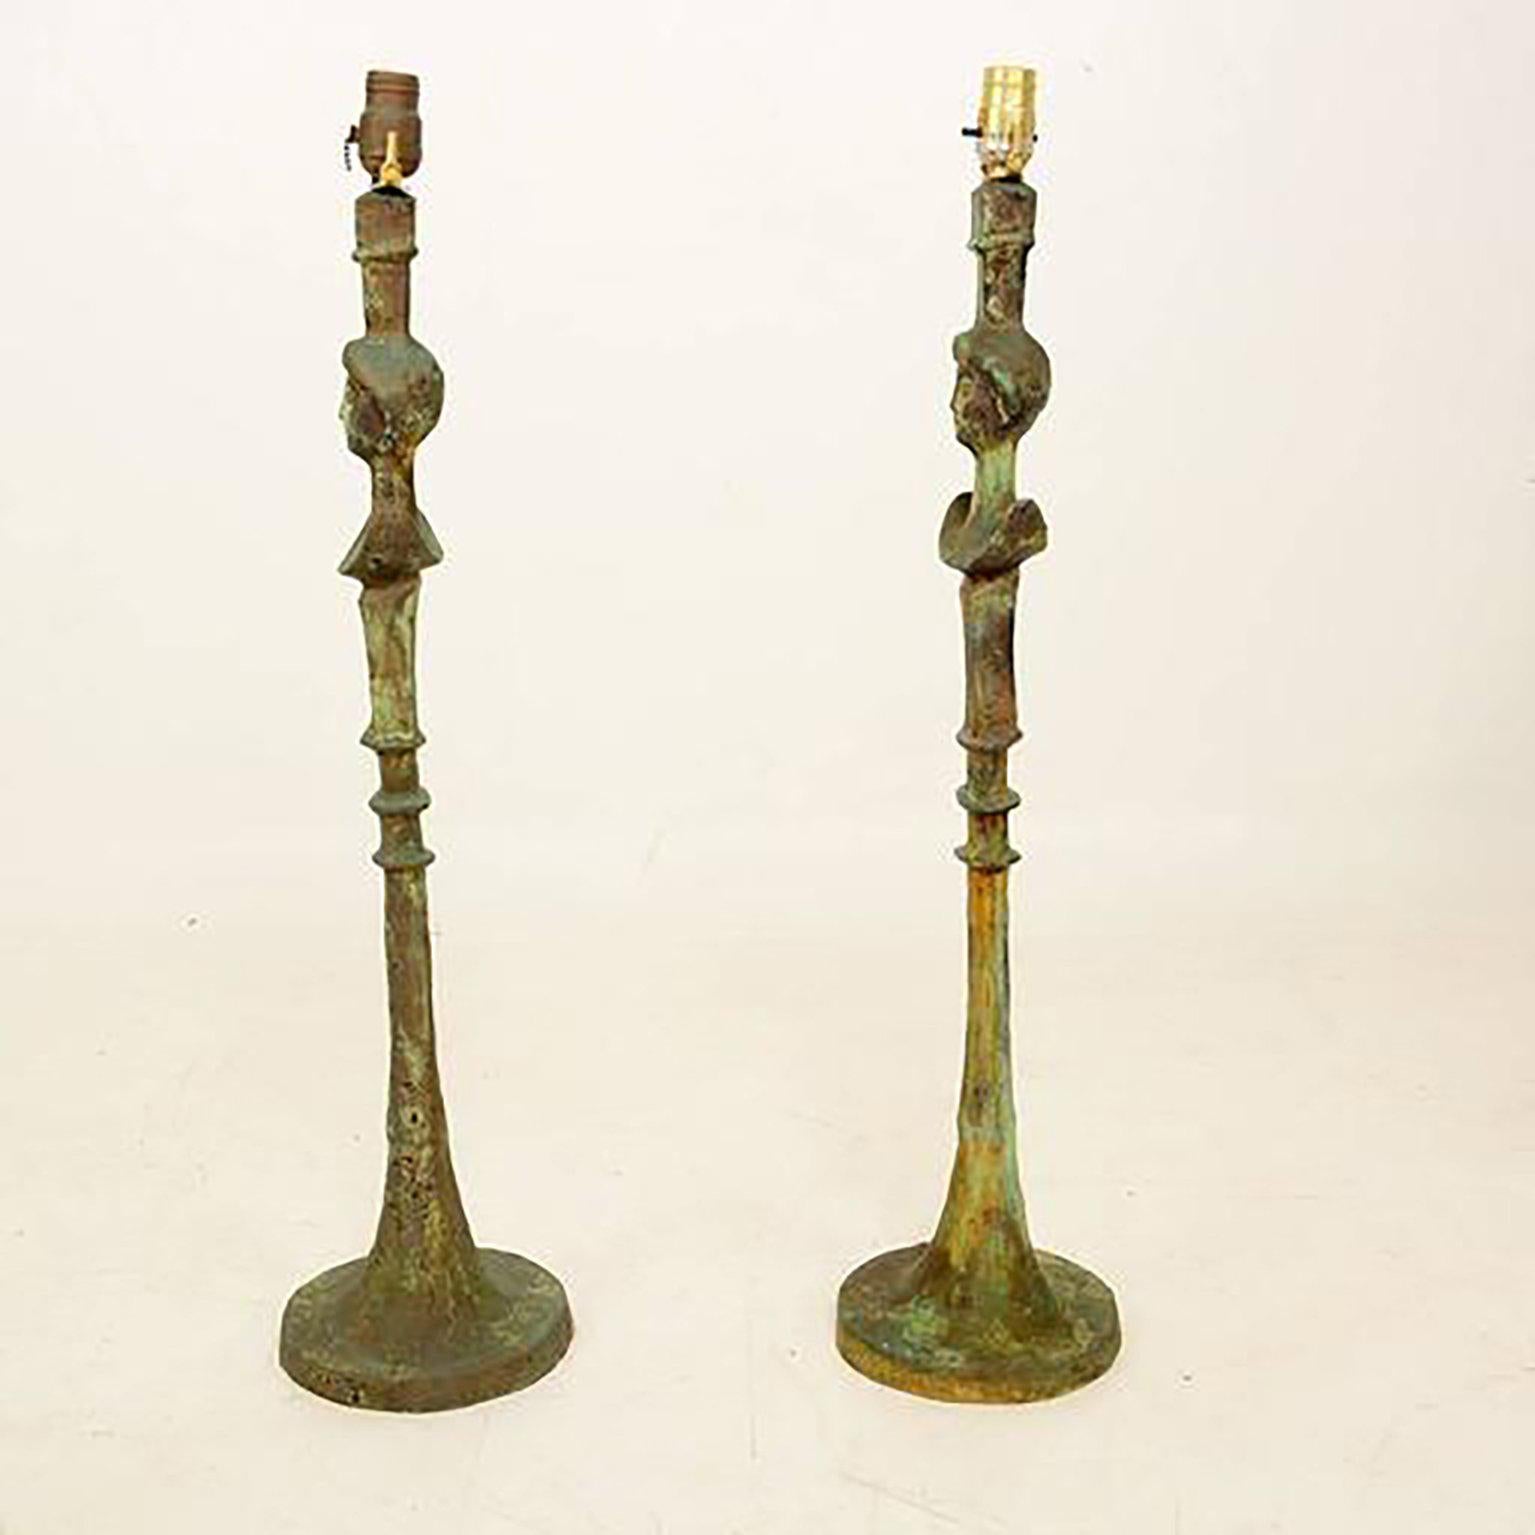 Elegant Pair of Tete de Femme Table Lamps after Giacometti 1950s 1